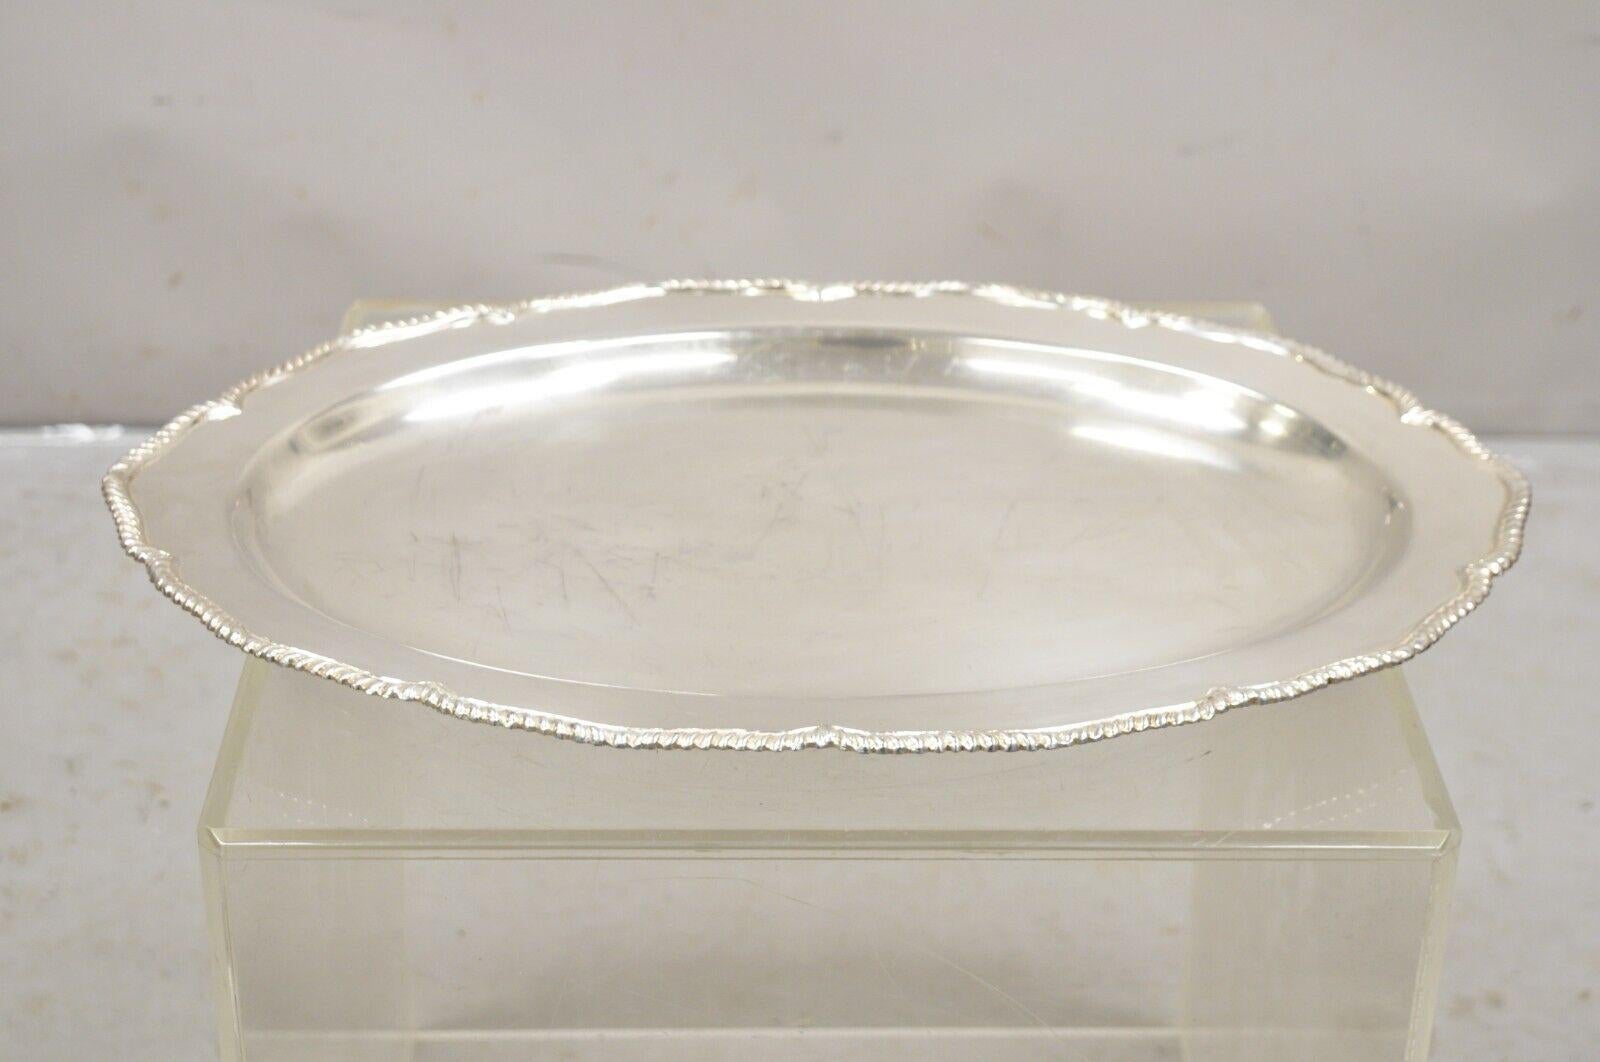 Vintage English Regency Silver Plated Oval Modernist Serving Platter Tray. Circa Mid 20th Century. Mesures :  1